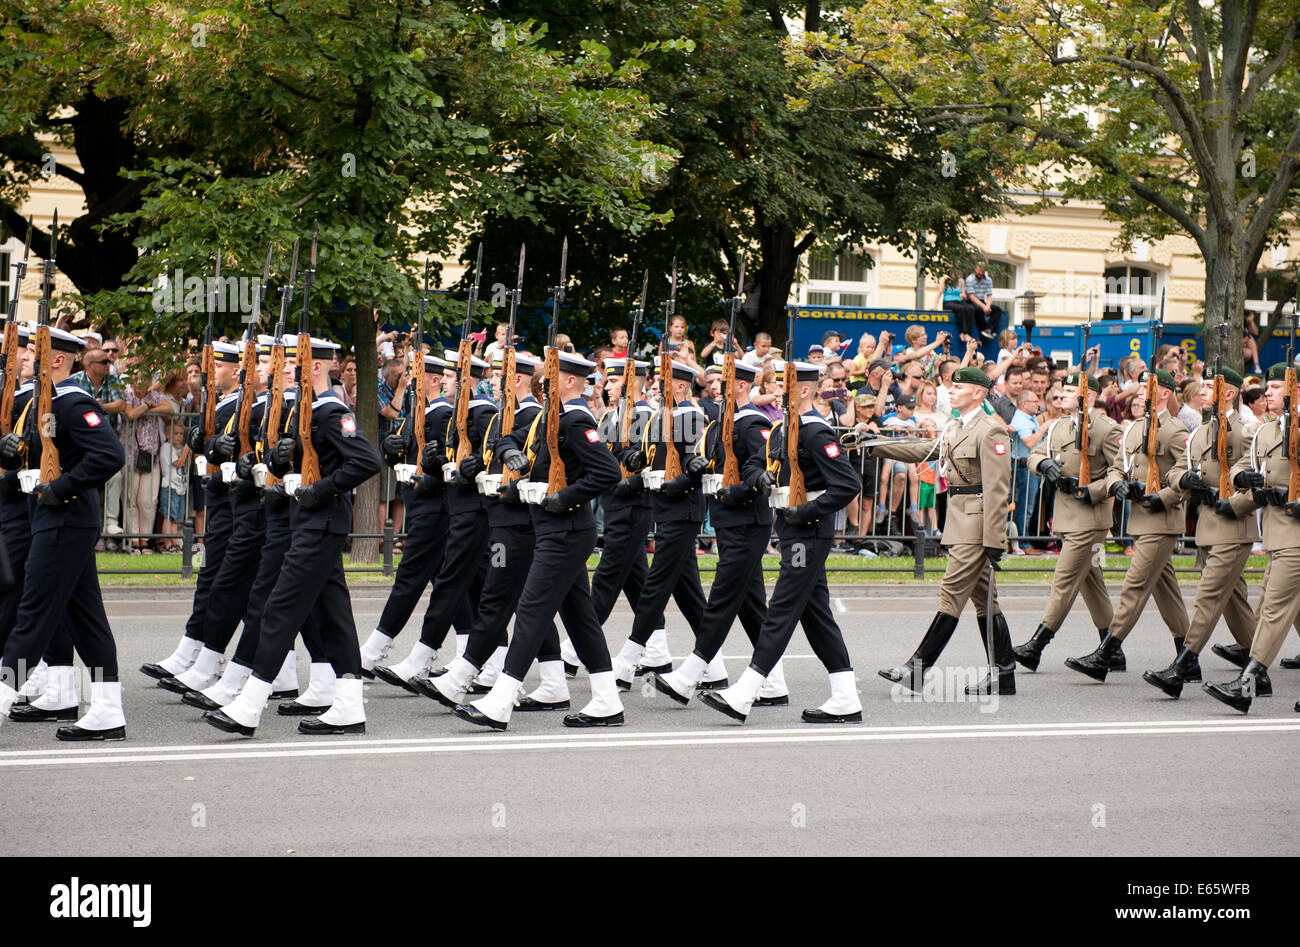 military-parade-in-warsaw-E65WFB.jpg